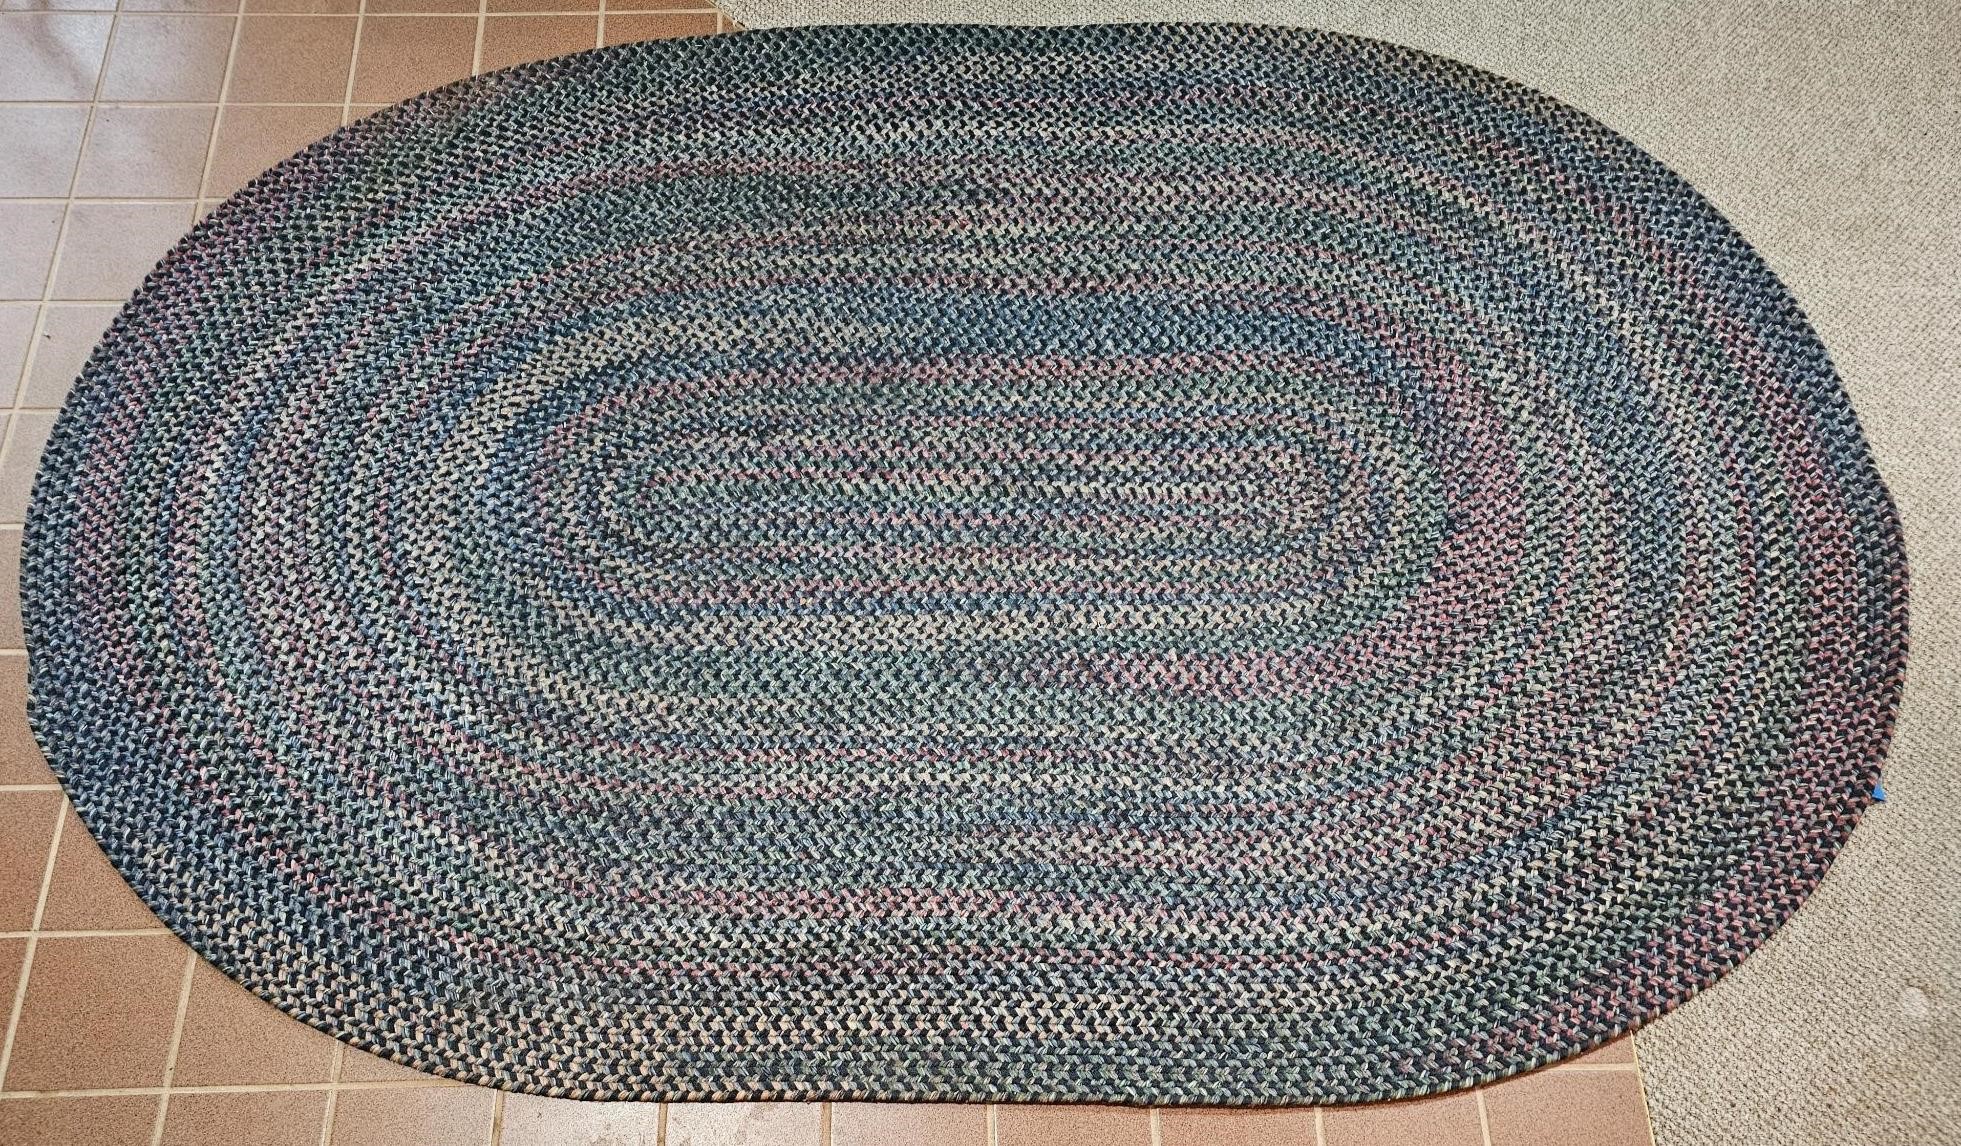 Large Oval Braided Rug 9' x 6'